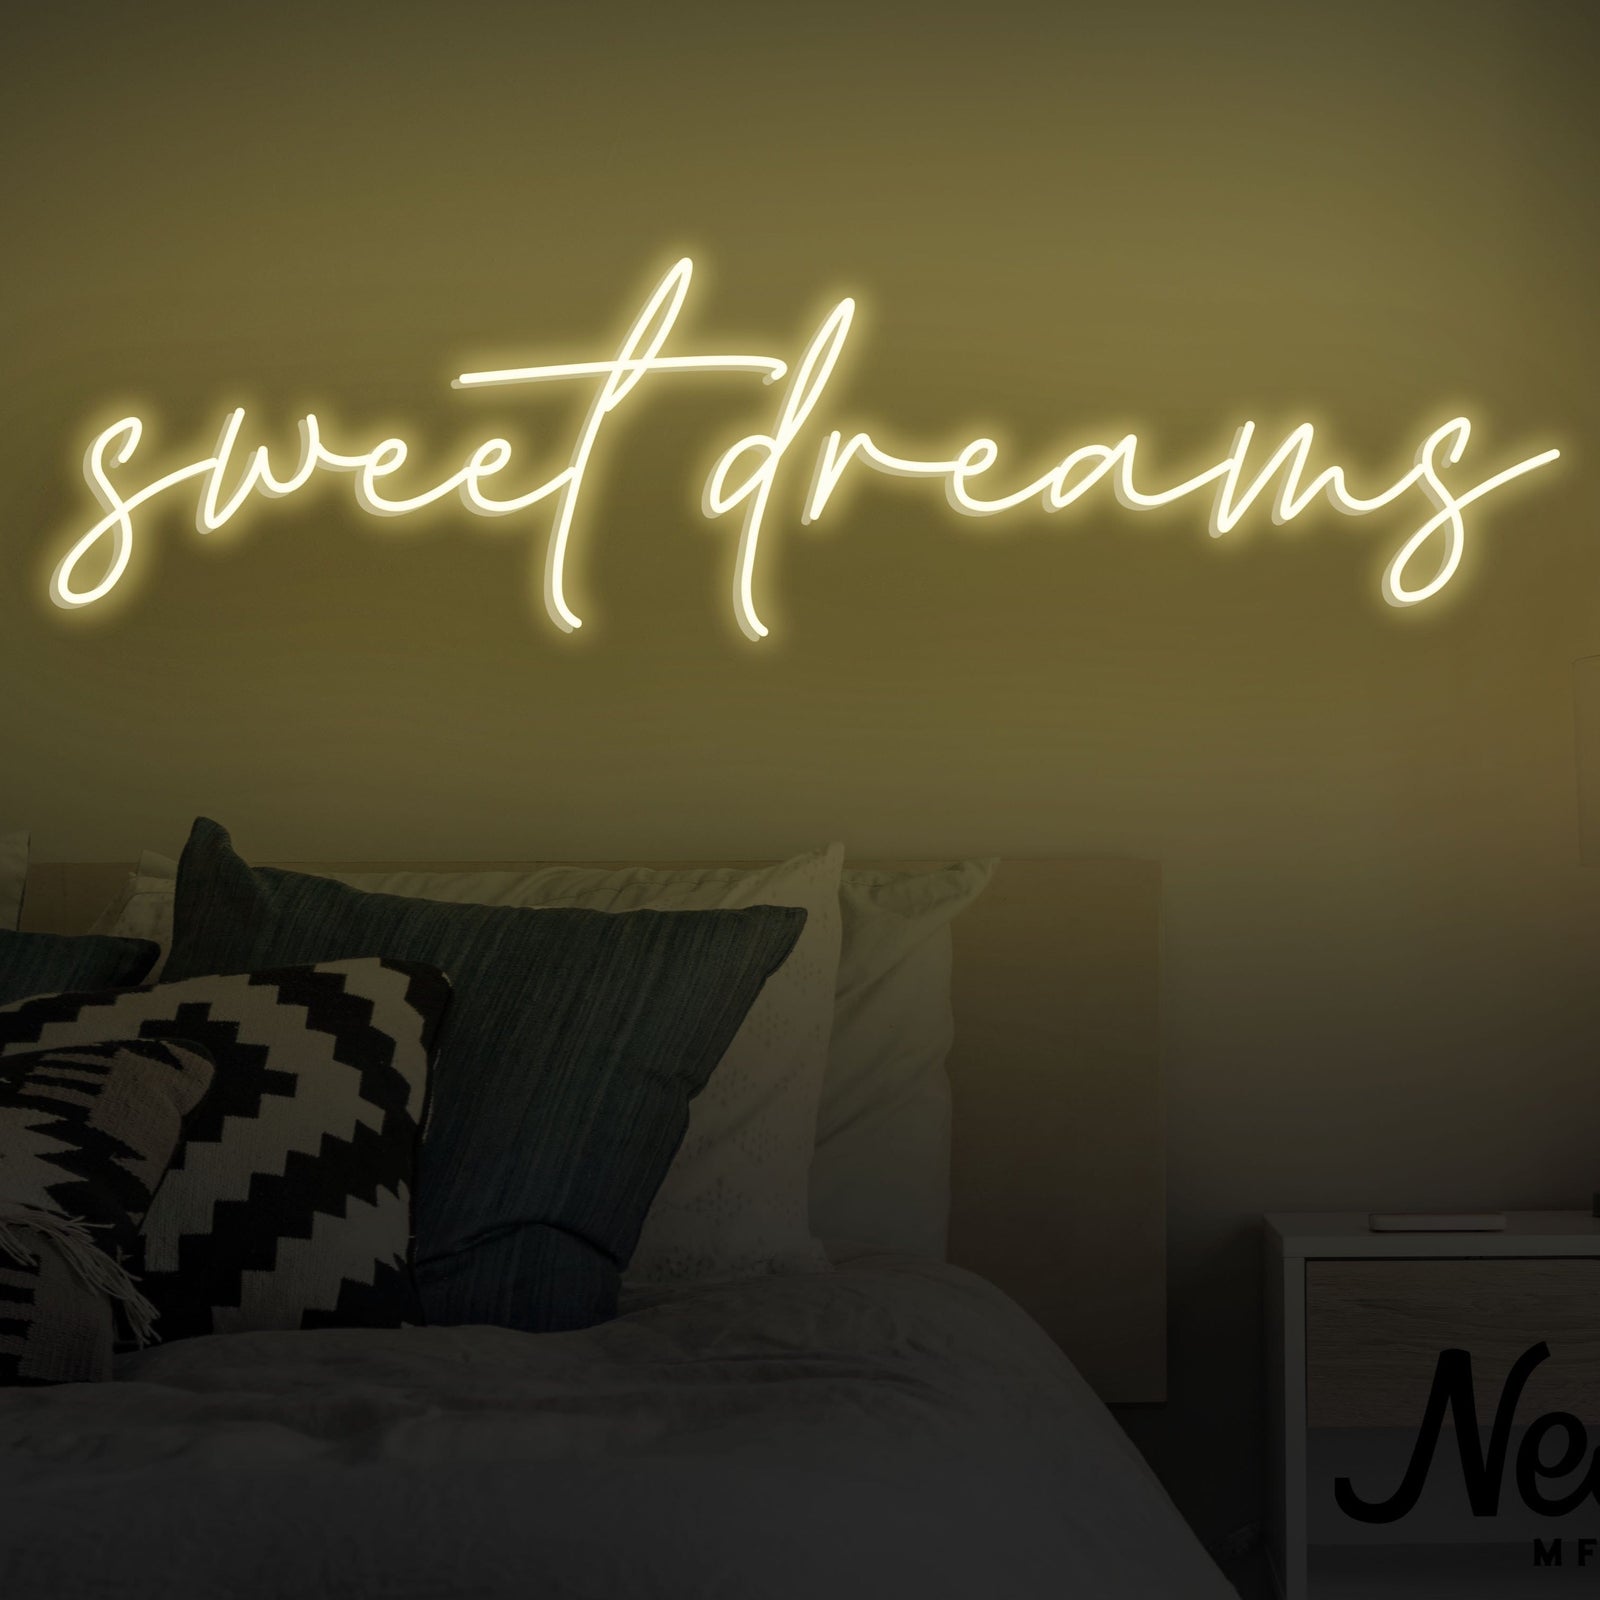 Neon Signs For Bedrooms Or Home | Neon Mfg - Neon Mfg.